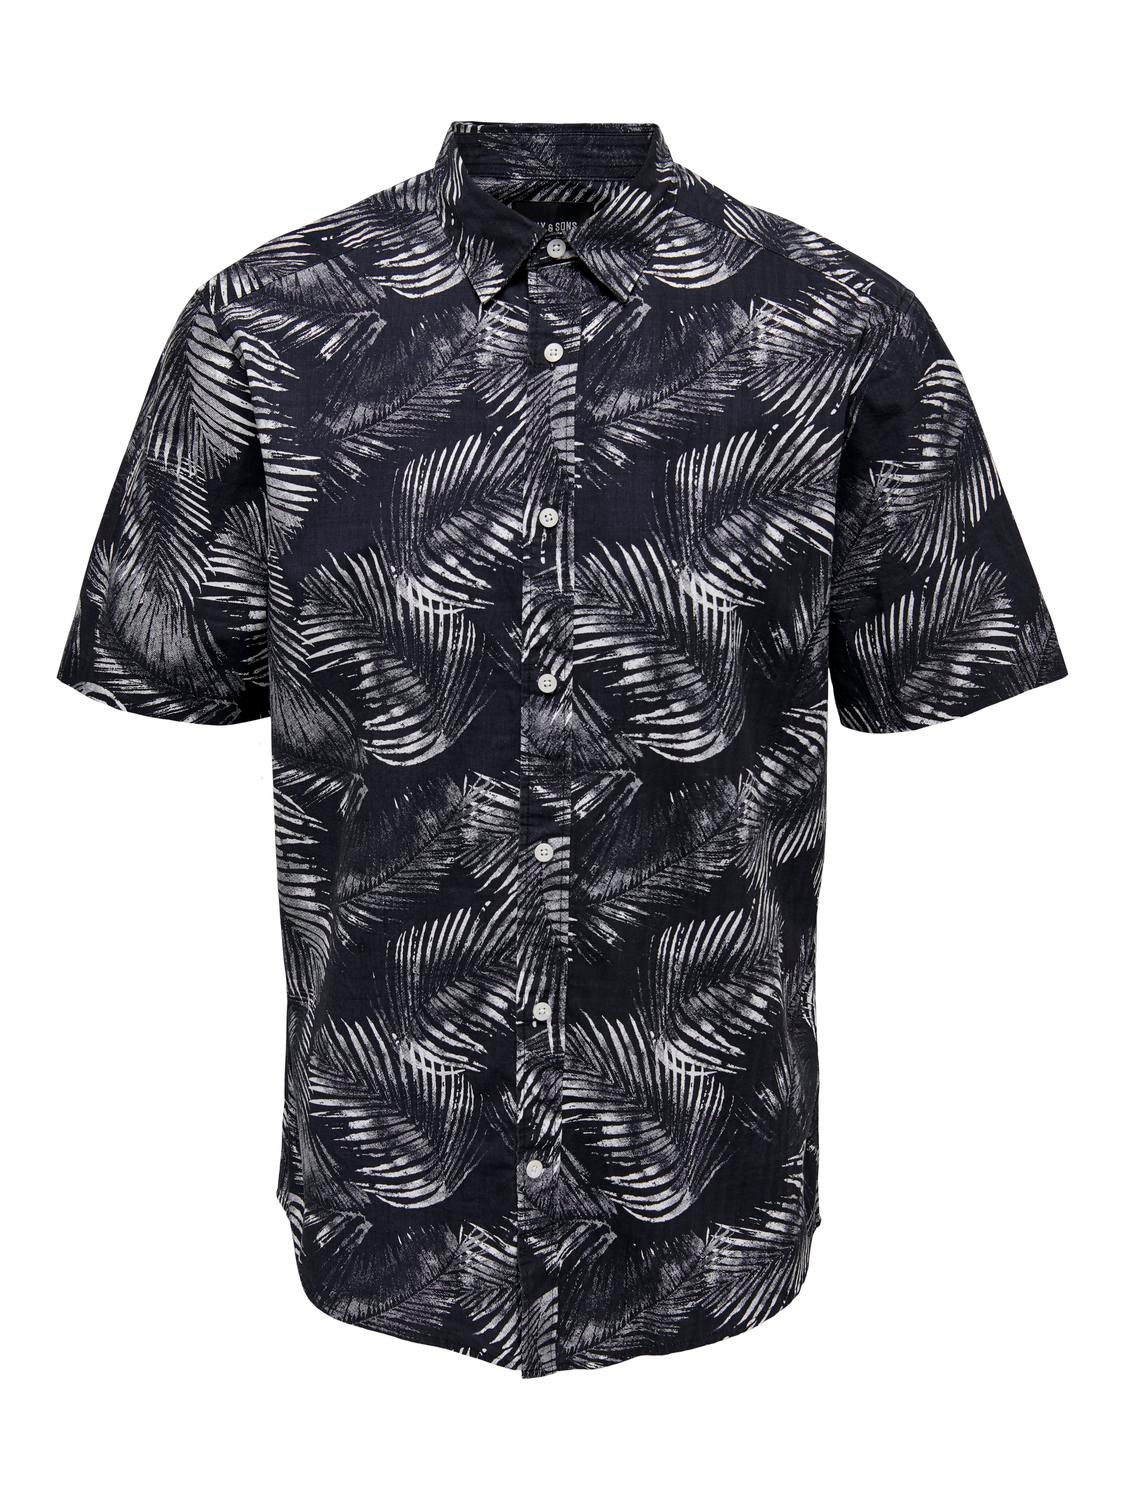 ONLY & SONS casual shirt -Dark Navy - 22025050